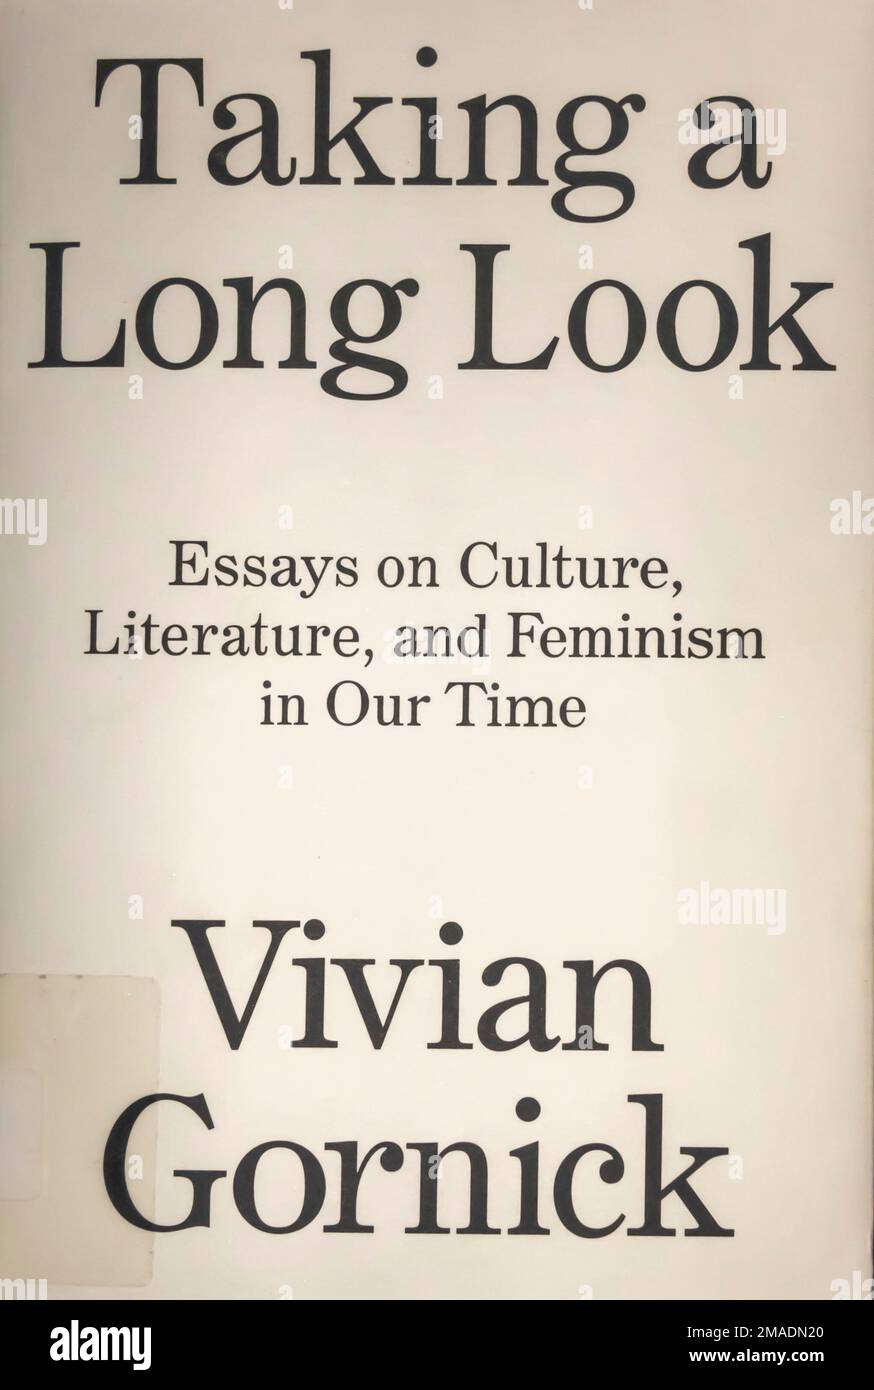 Taking A Long Look: Essays on Culture, Literature and Feminism in Our Time Book by Vivian Gornick  2021 Stock Photo